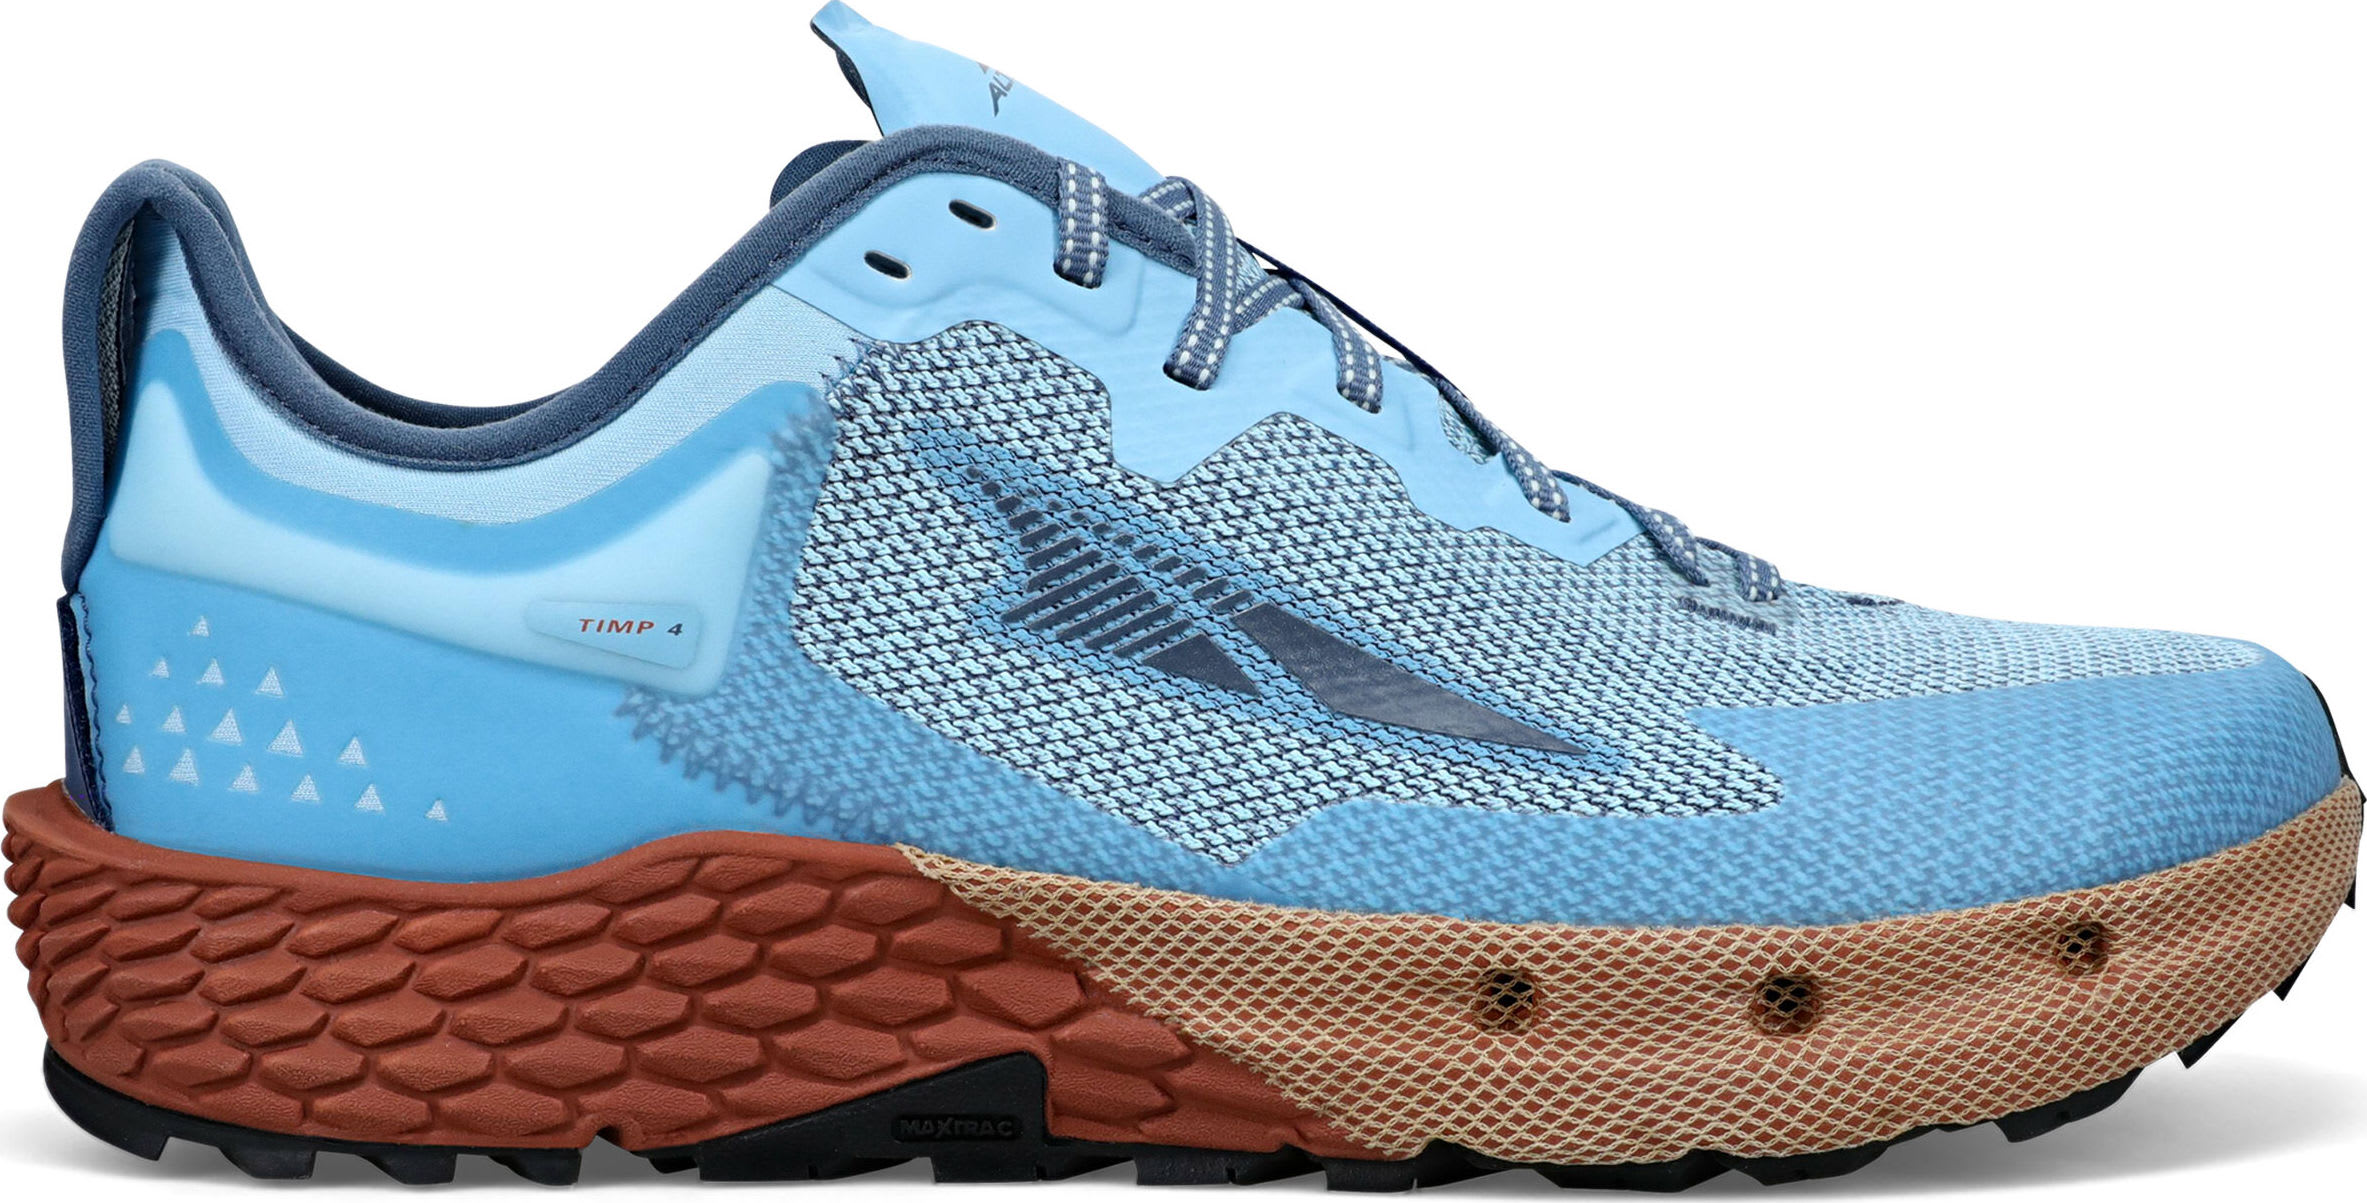 Buy Altra Men's Timp 4 from Outnorth